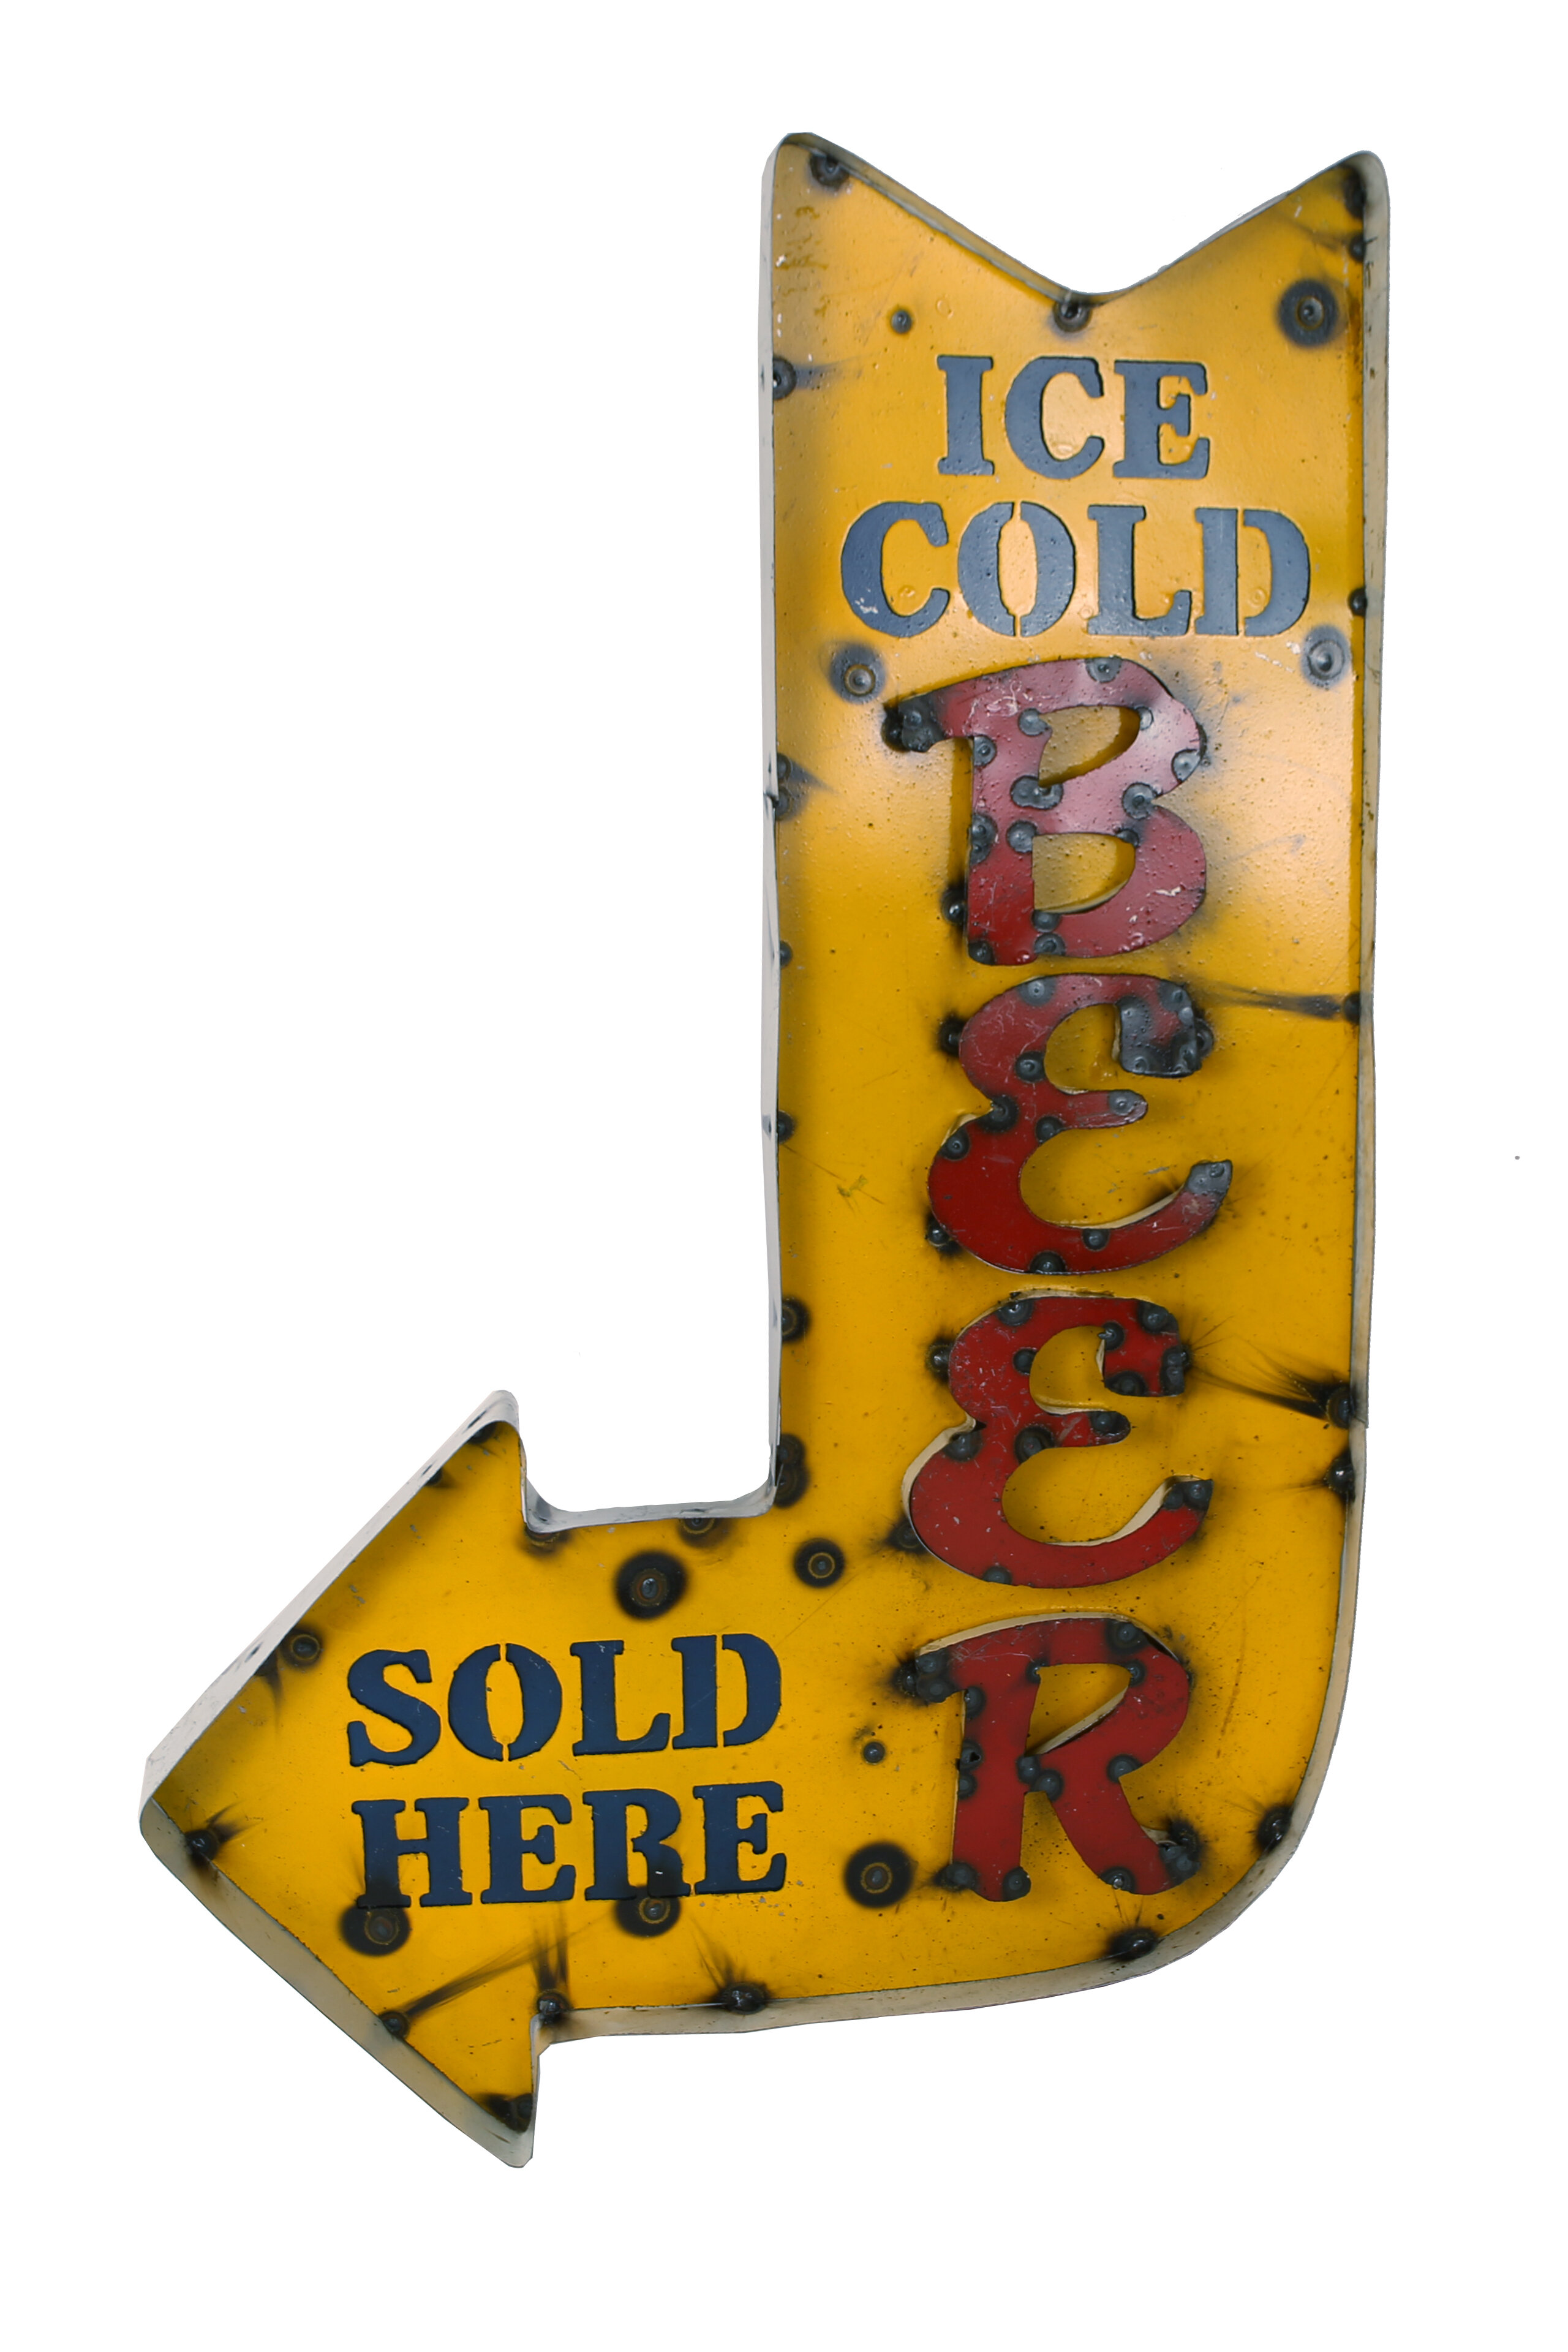 Sold here. Cold Beer sold here. Пиво стрела. Cold Beer sign. Bar Ice Cold Beer надпись.